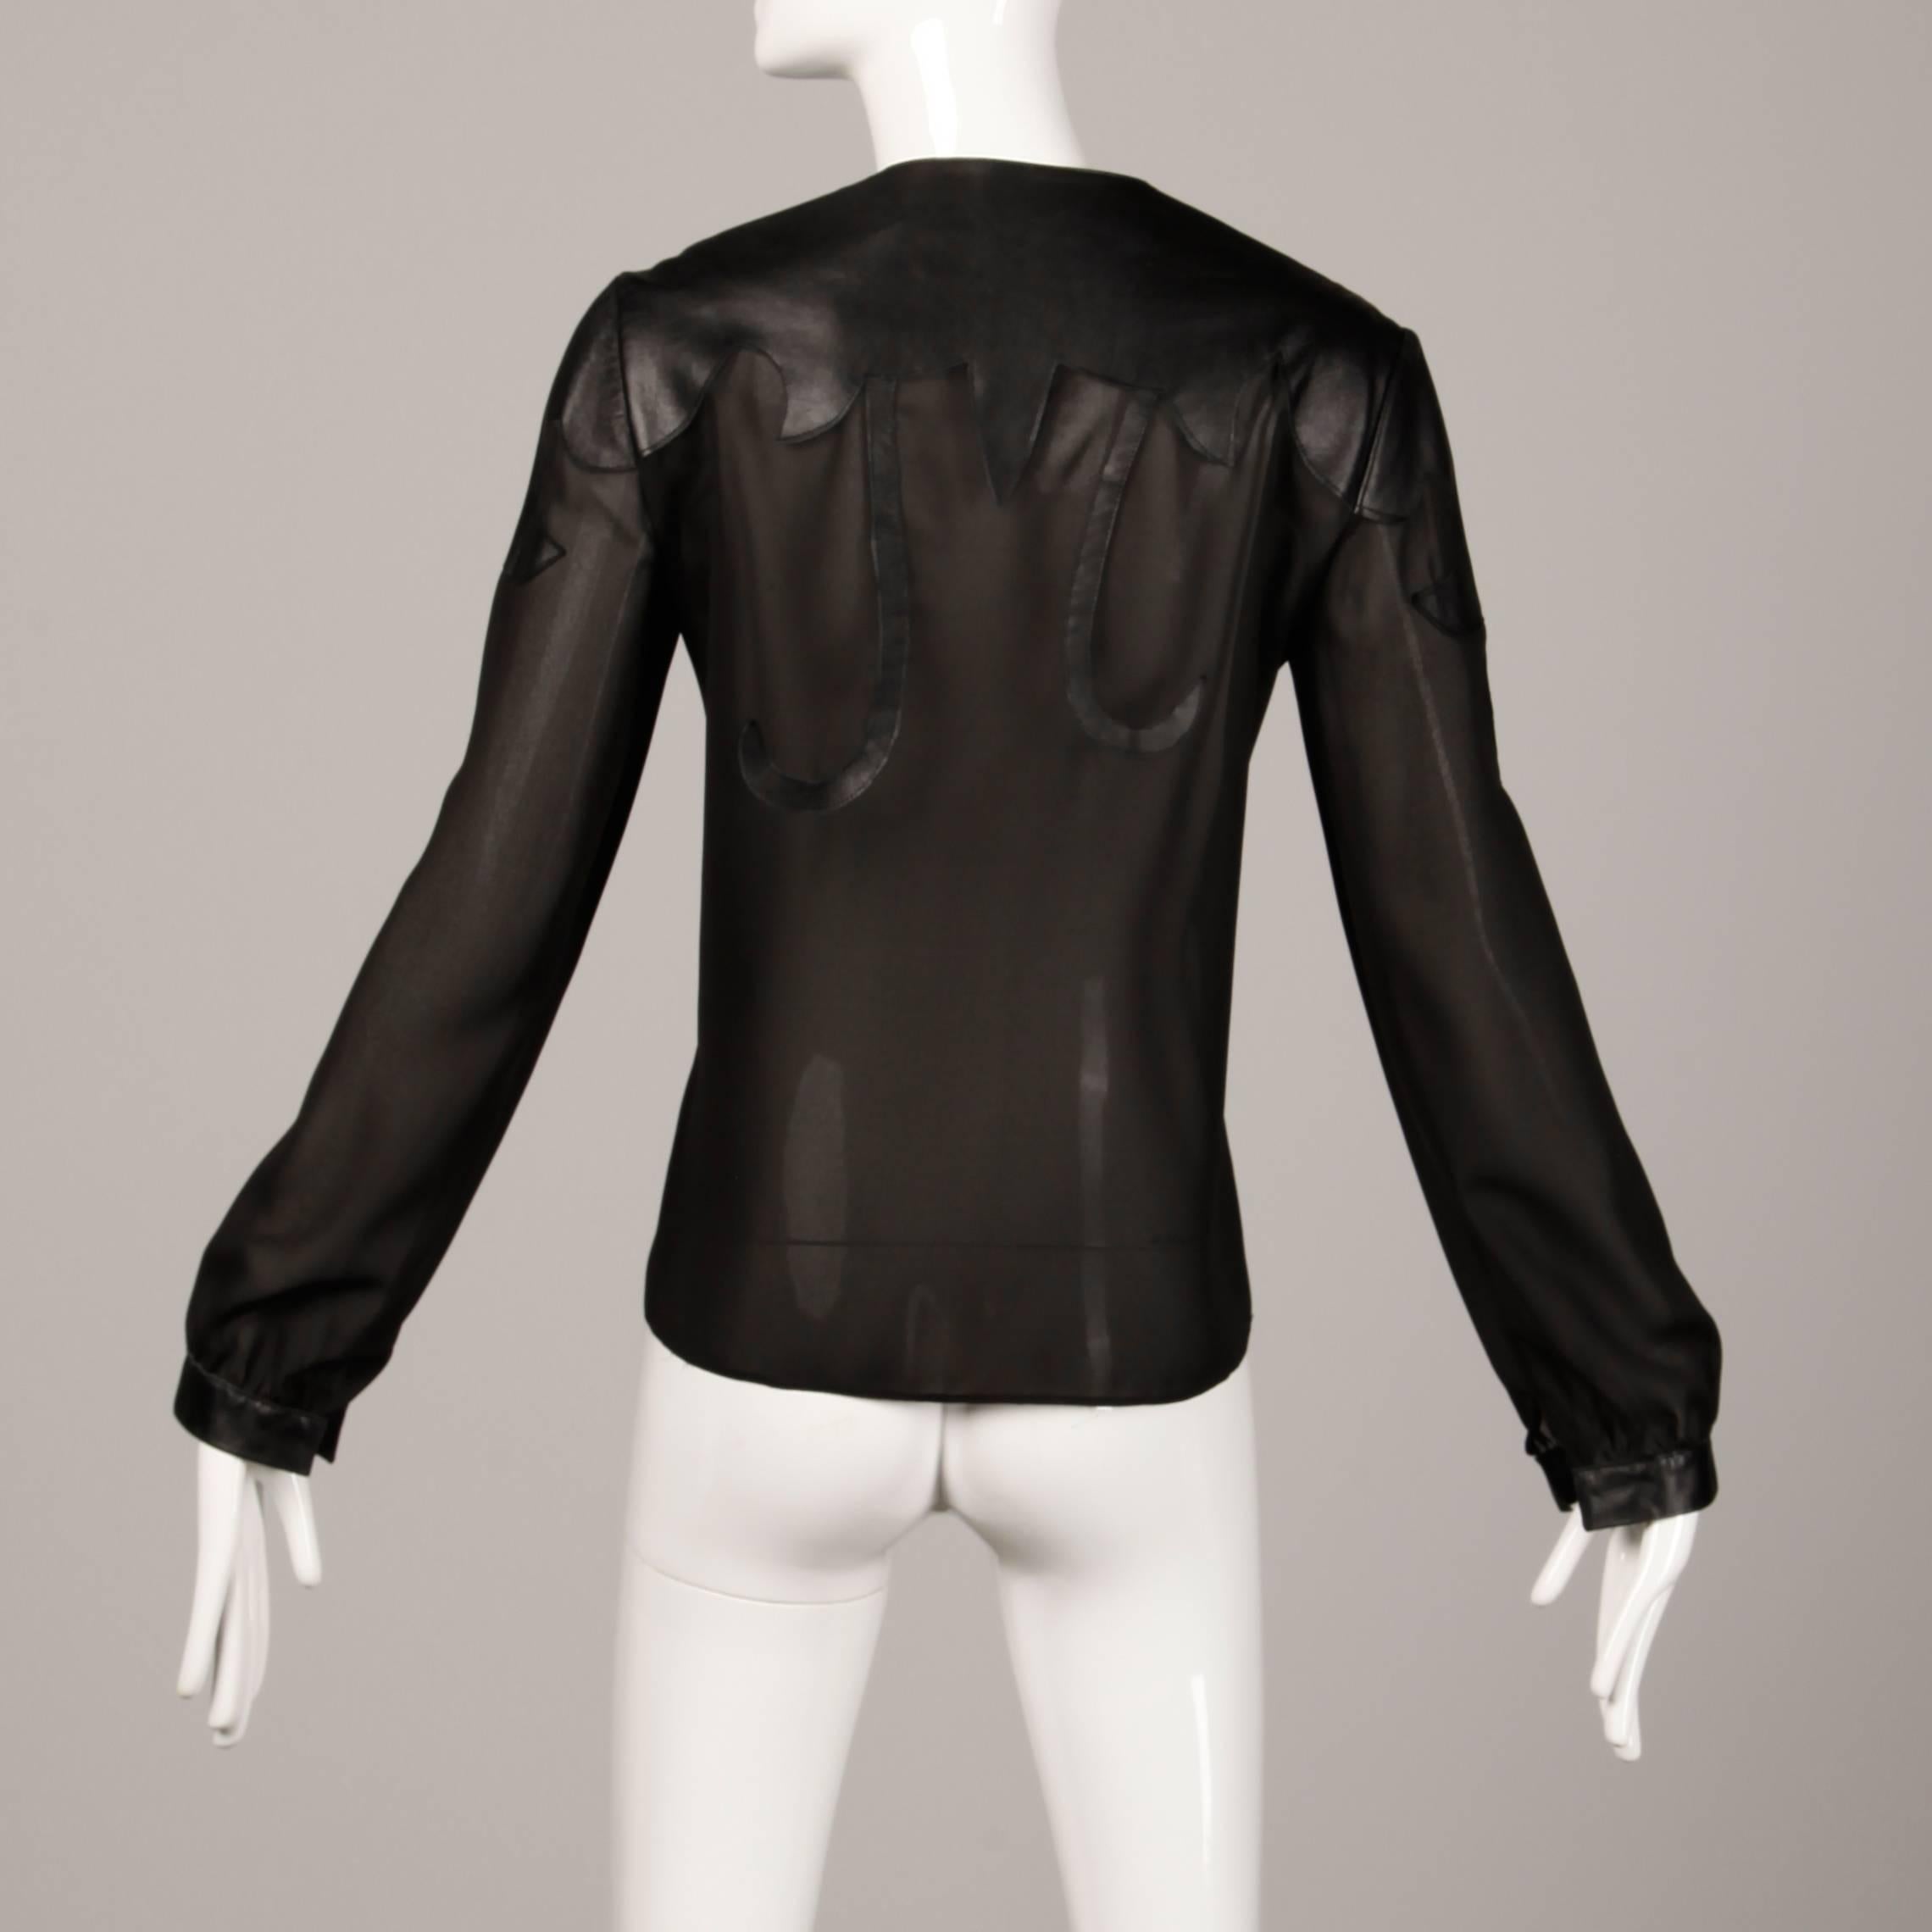 Giorgio Sant'Angelo 1970s Vintage Black Leather Patchwork Blouse, Top or Shirt 2